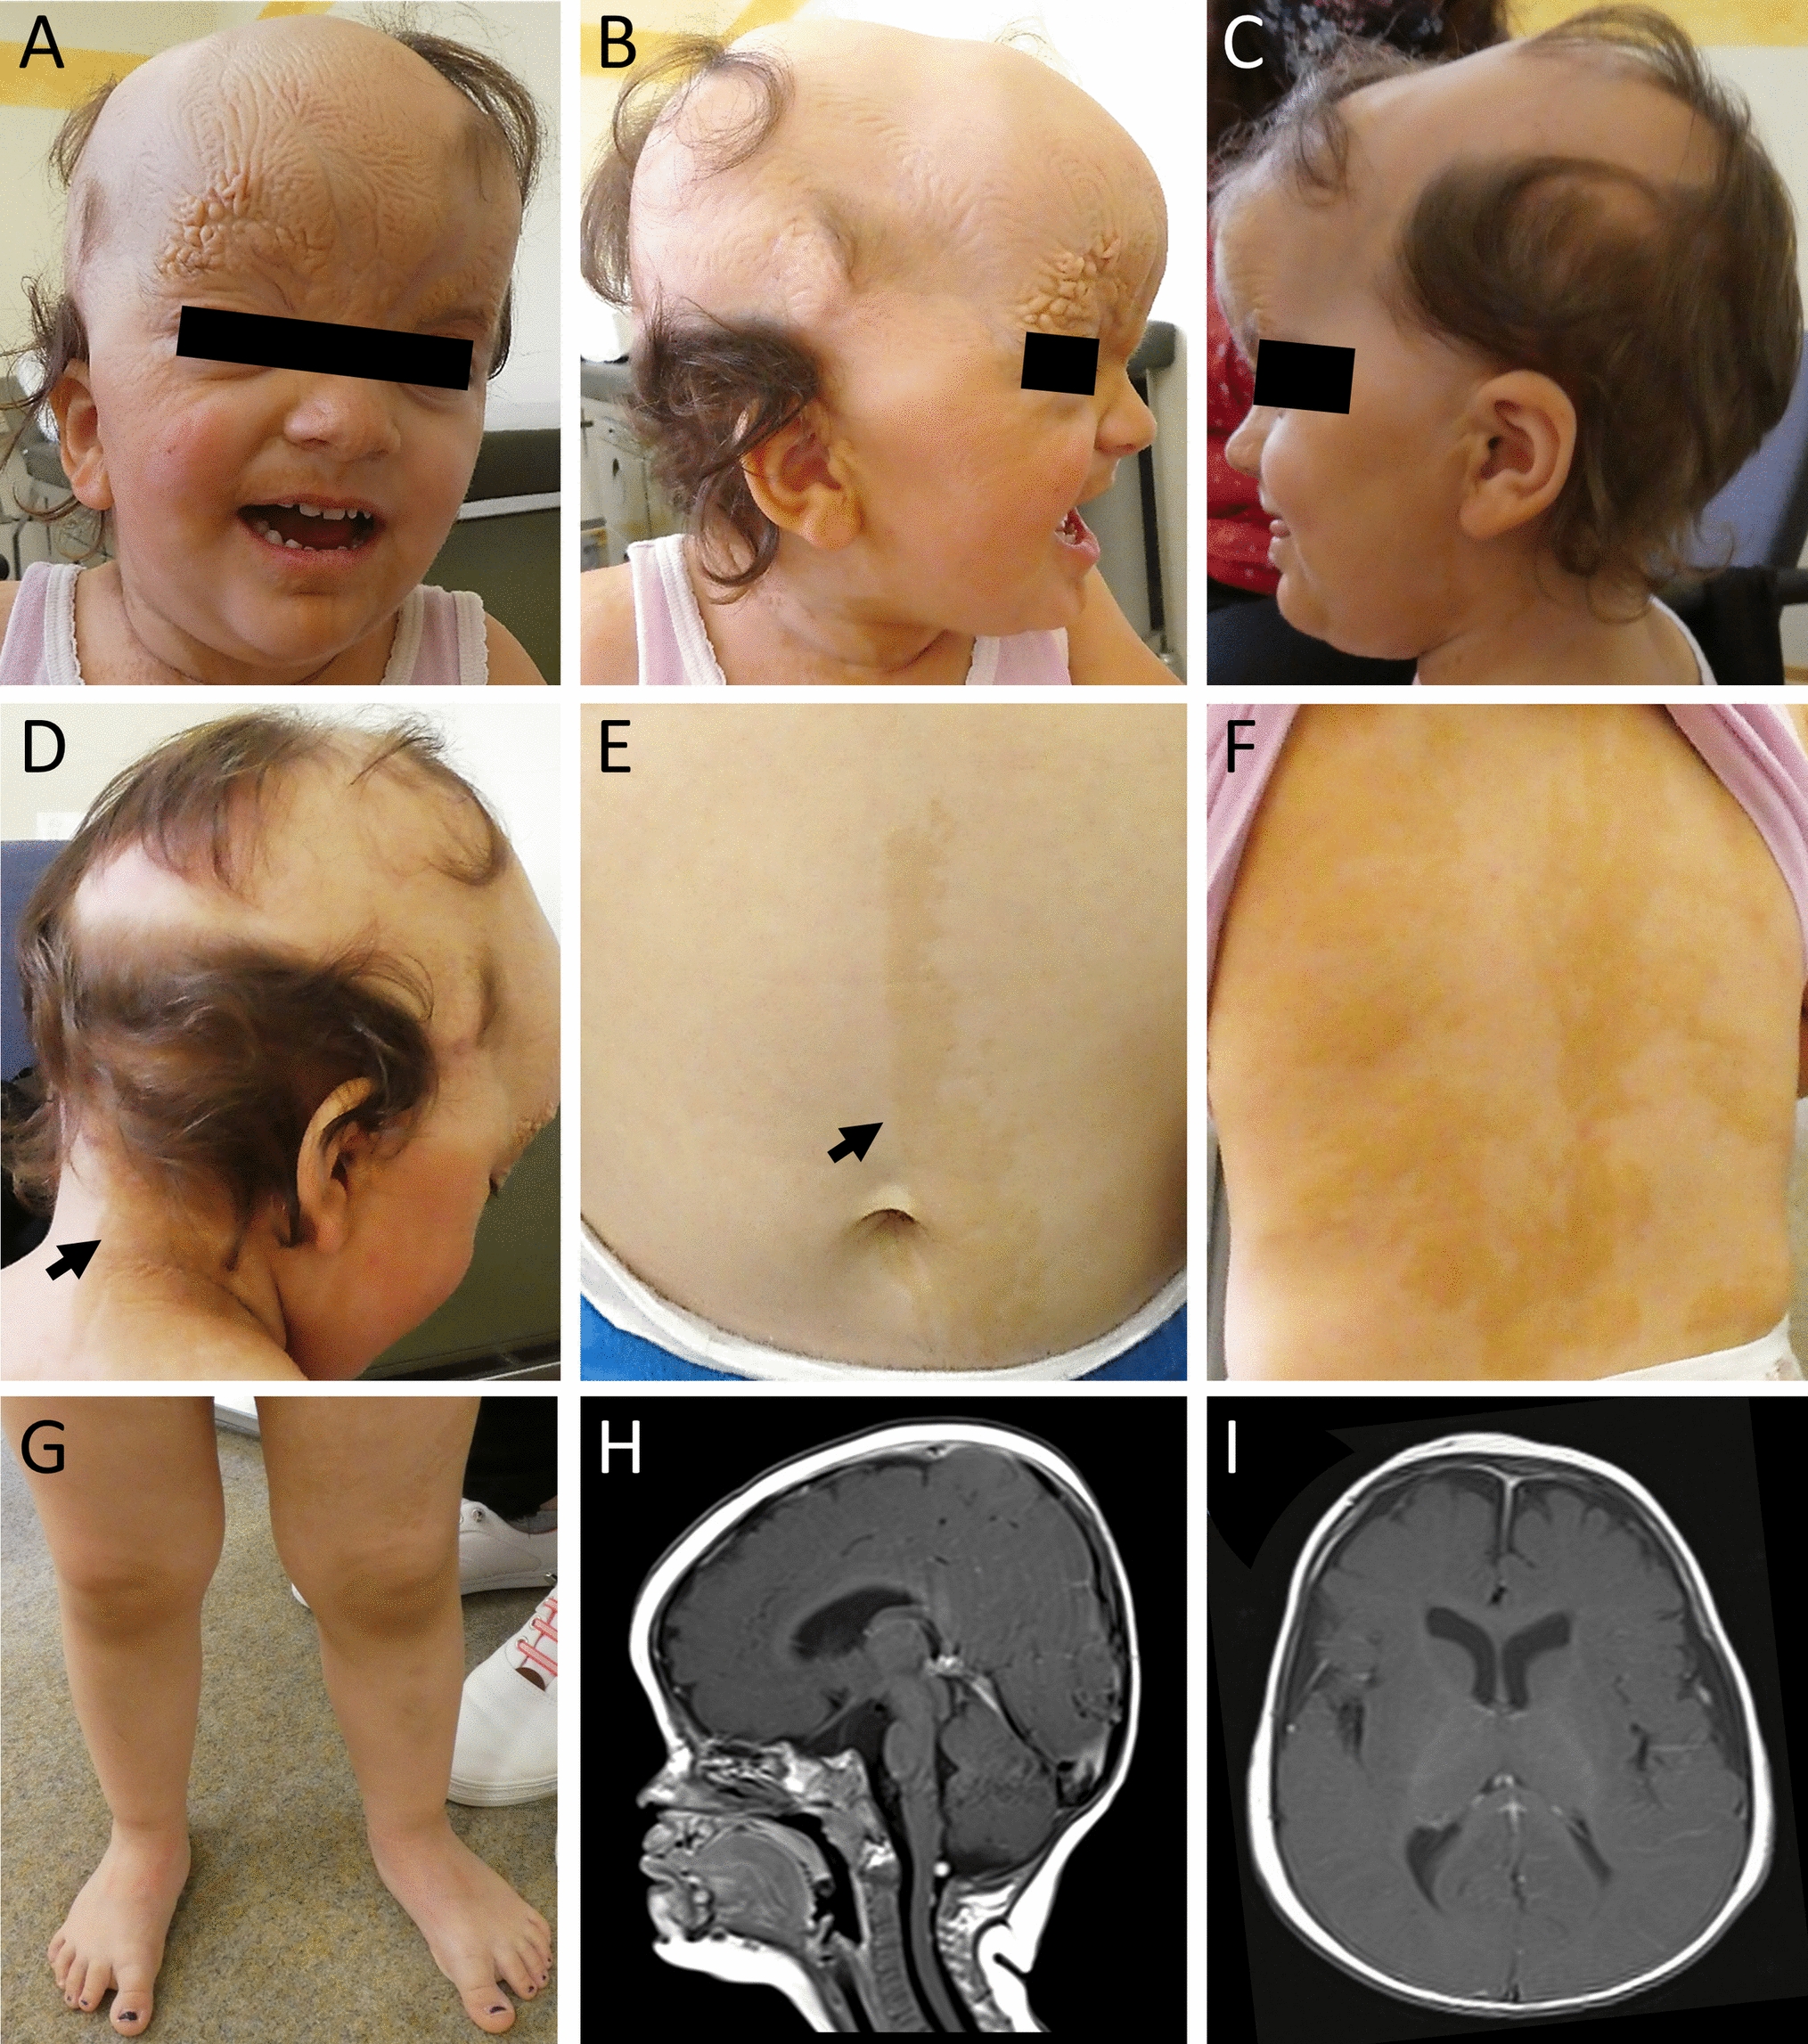 Expansion of the complex genotypic and phenotypic spectrum of FGFR2-associated neurocutaneous syndromes